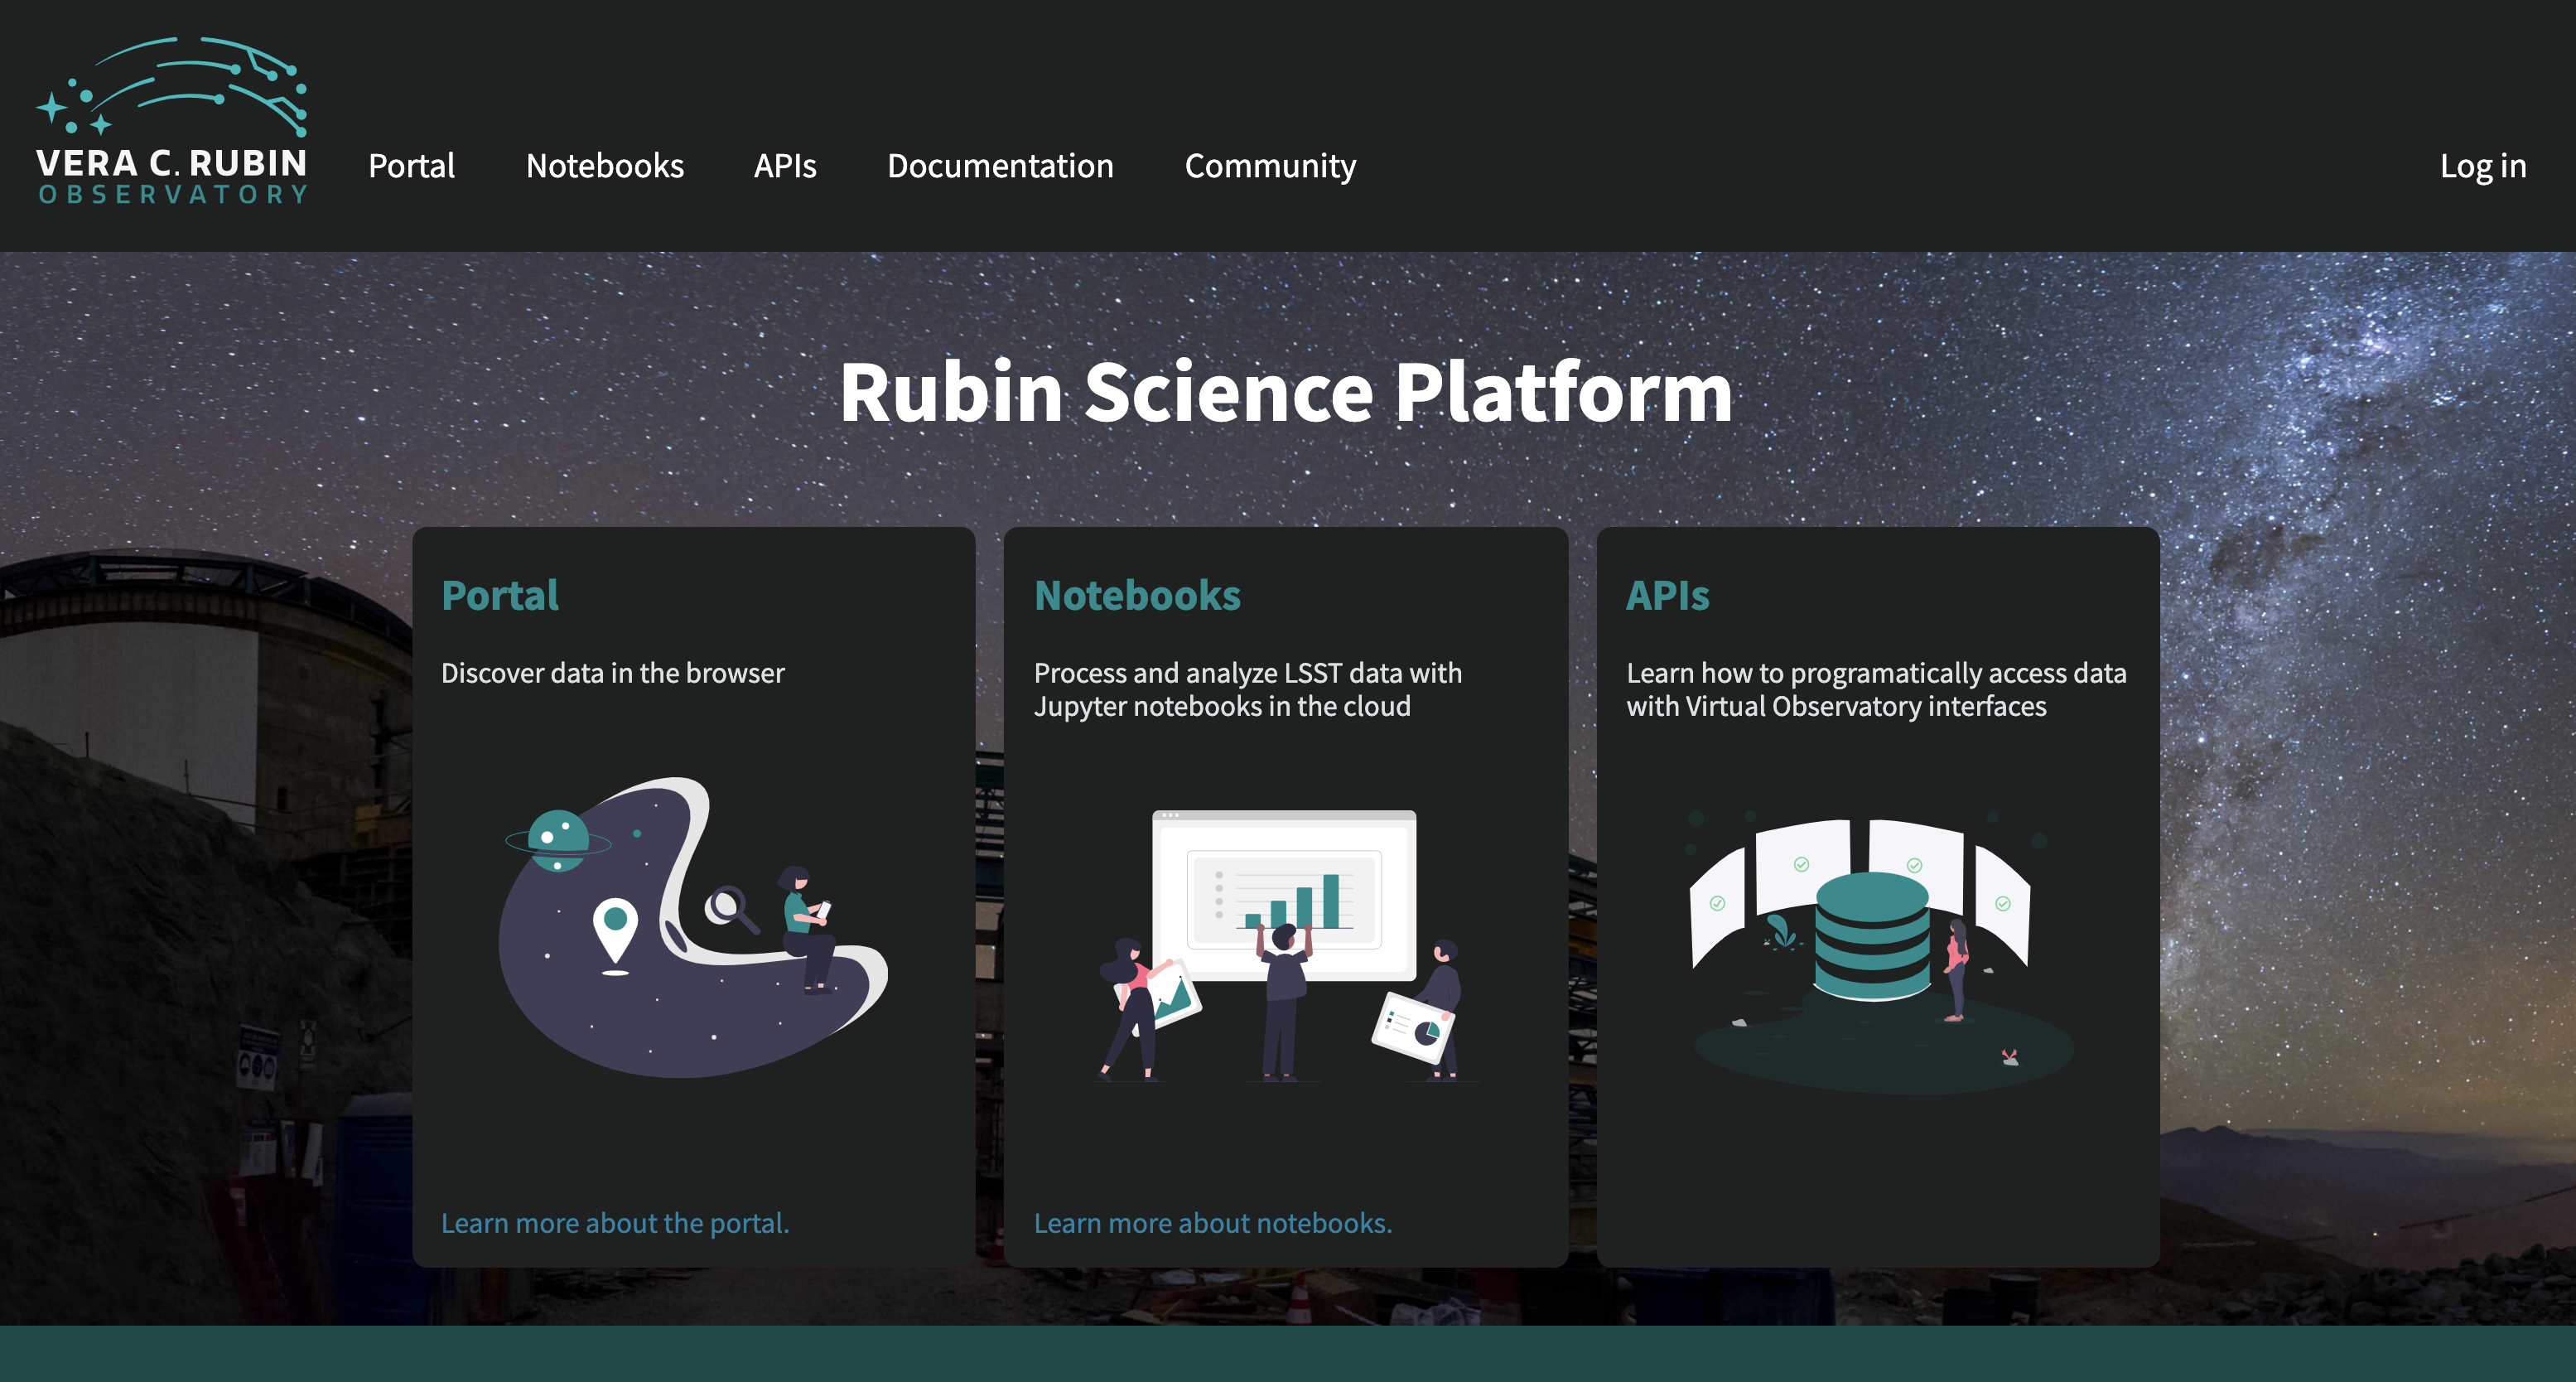 Screenshot of the rubin science platform login screen.  Image has a menu on the top for the user to select the portal, notebooks, api, documentation, or community forum. The center of the image shows three panels to allow the user to select the portal, notebook, or API apsects.